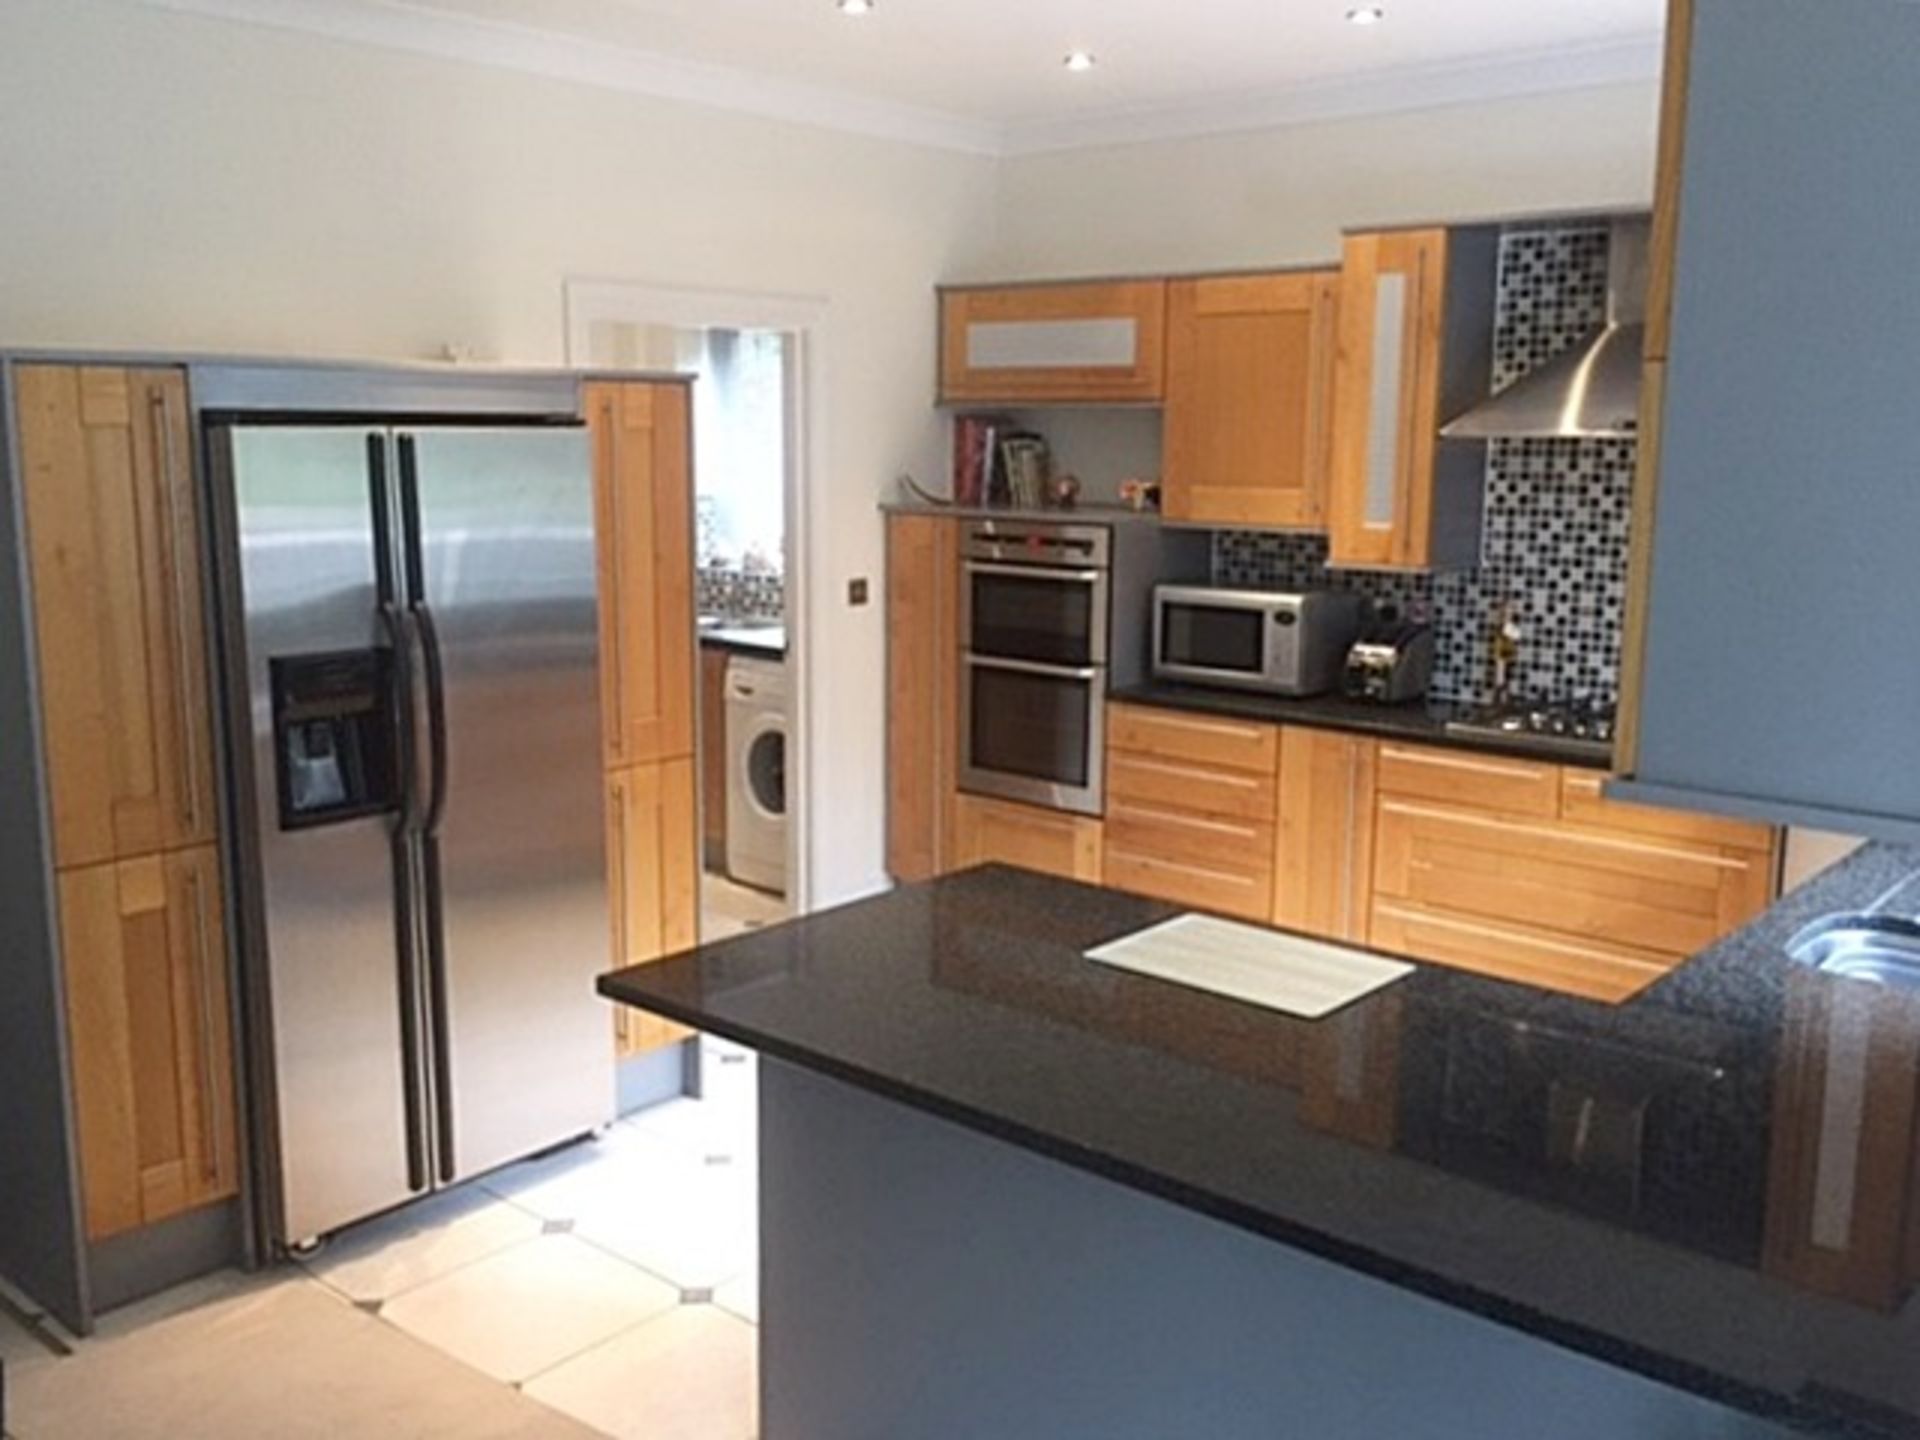 1 x Solid Wood Fitted Kitchen By Panorama - Features Luxurious Black Granite Worktops, Integrated - Image 20 of 31